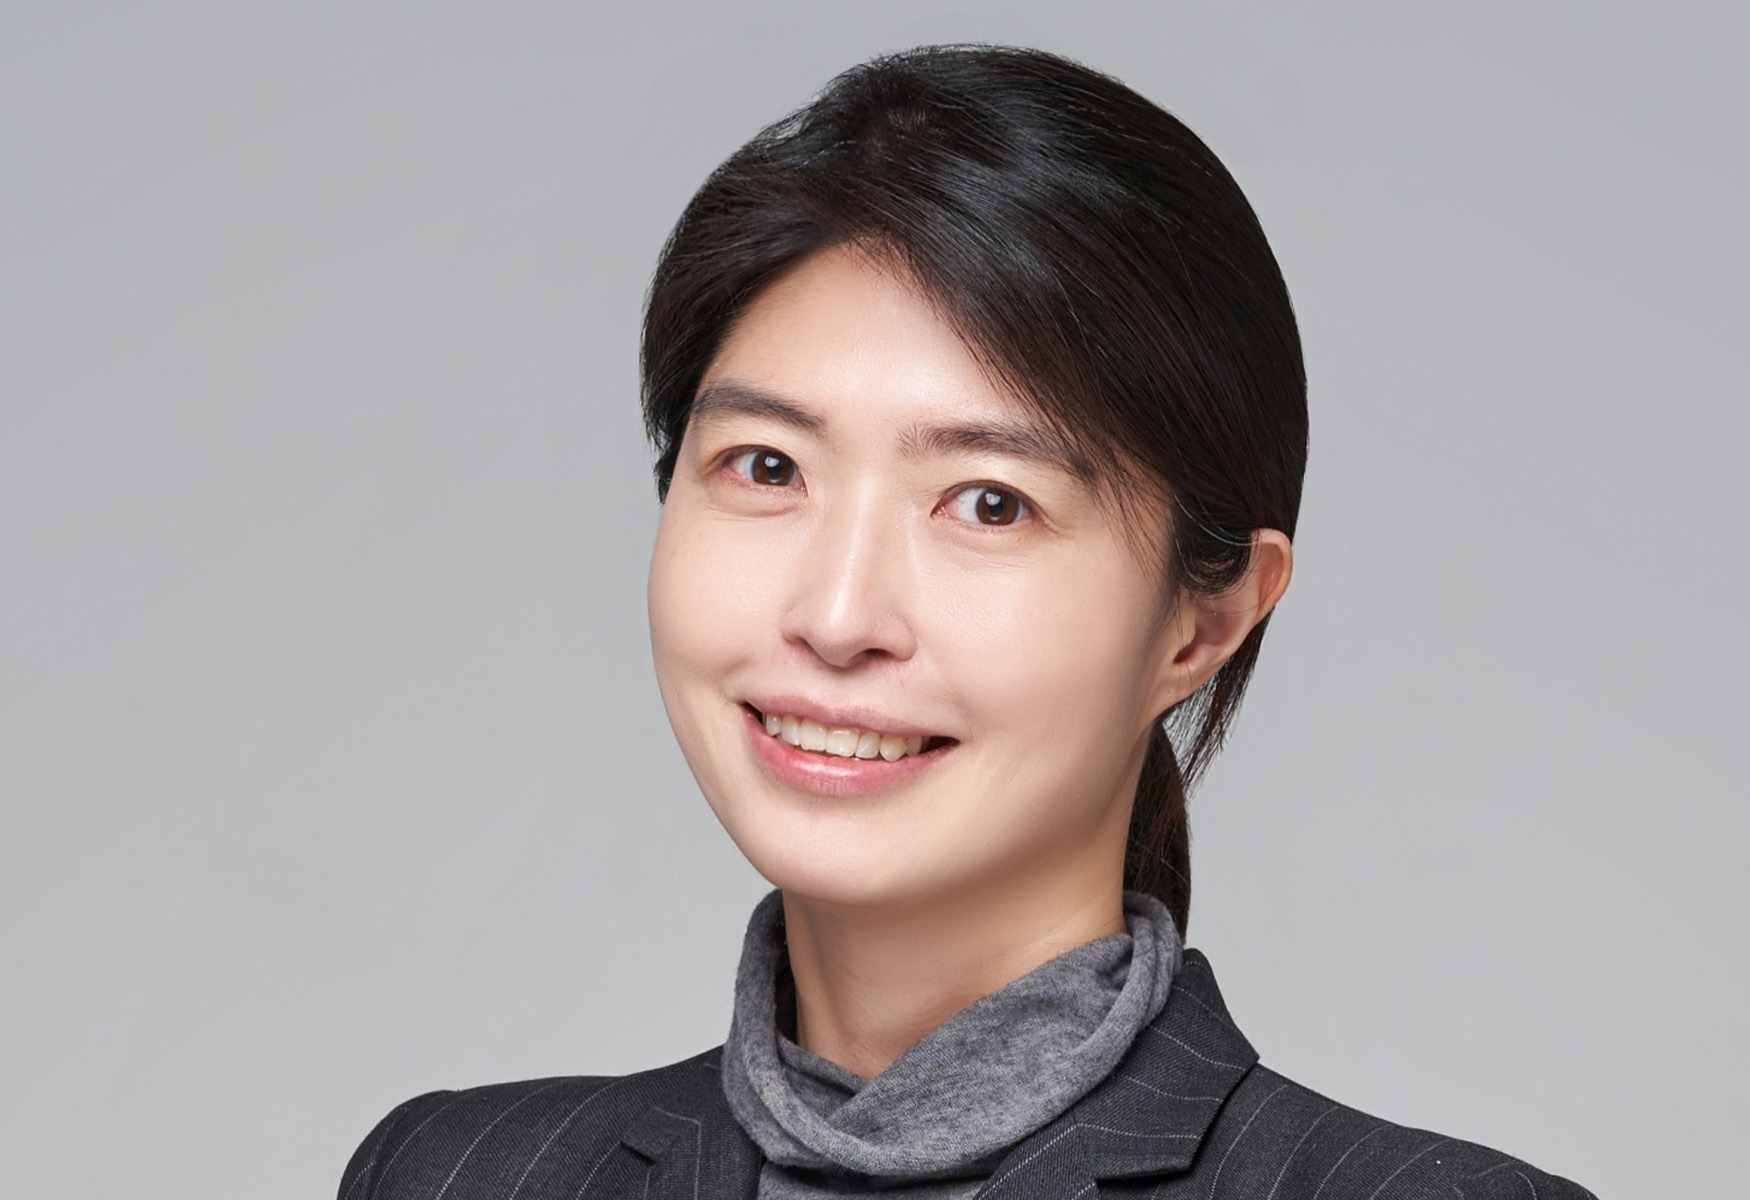 kakao-appoints-shina-chung-as-new-ceo-amid-ongoing-crisis